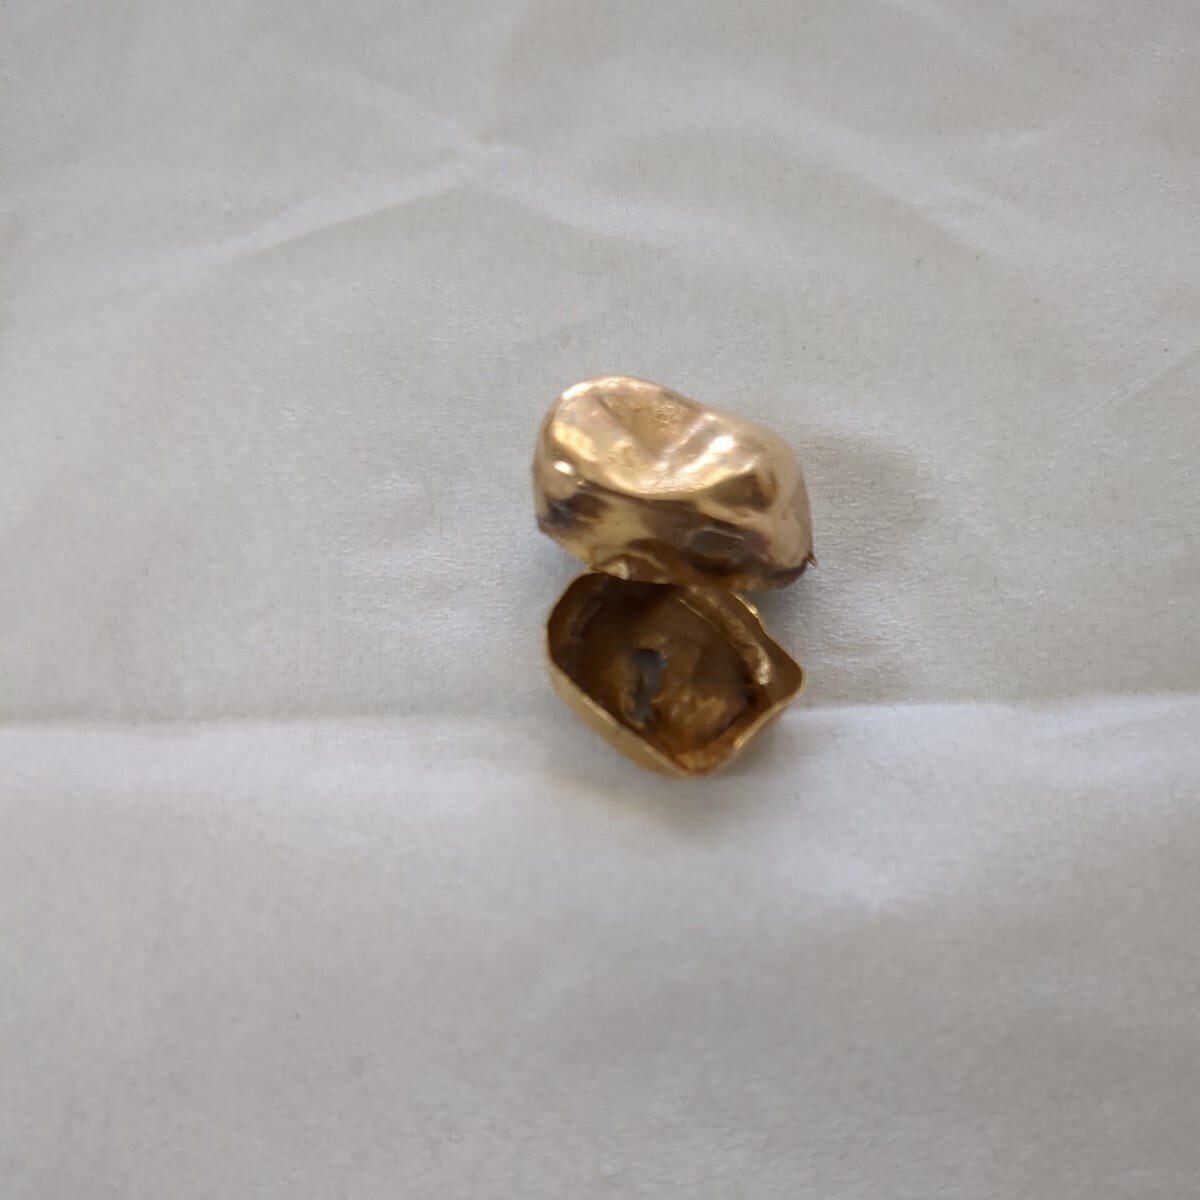  gold tooth 2.1 gram Gold 